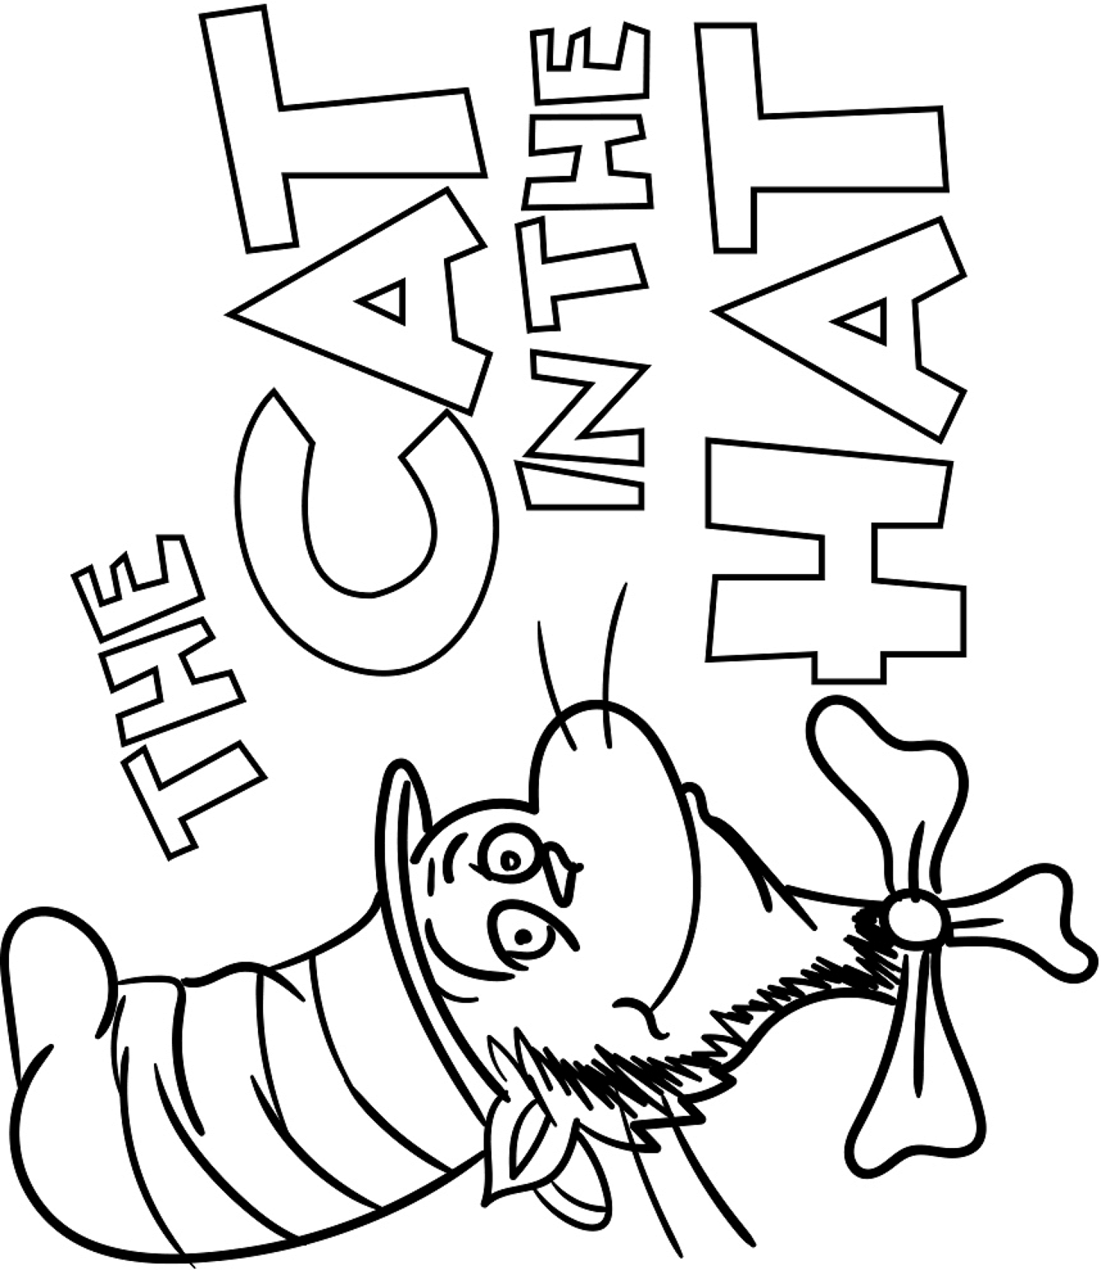 Cat in the Hat Coloring Pages - Free Printable Coloring Pages for Kids